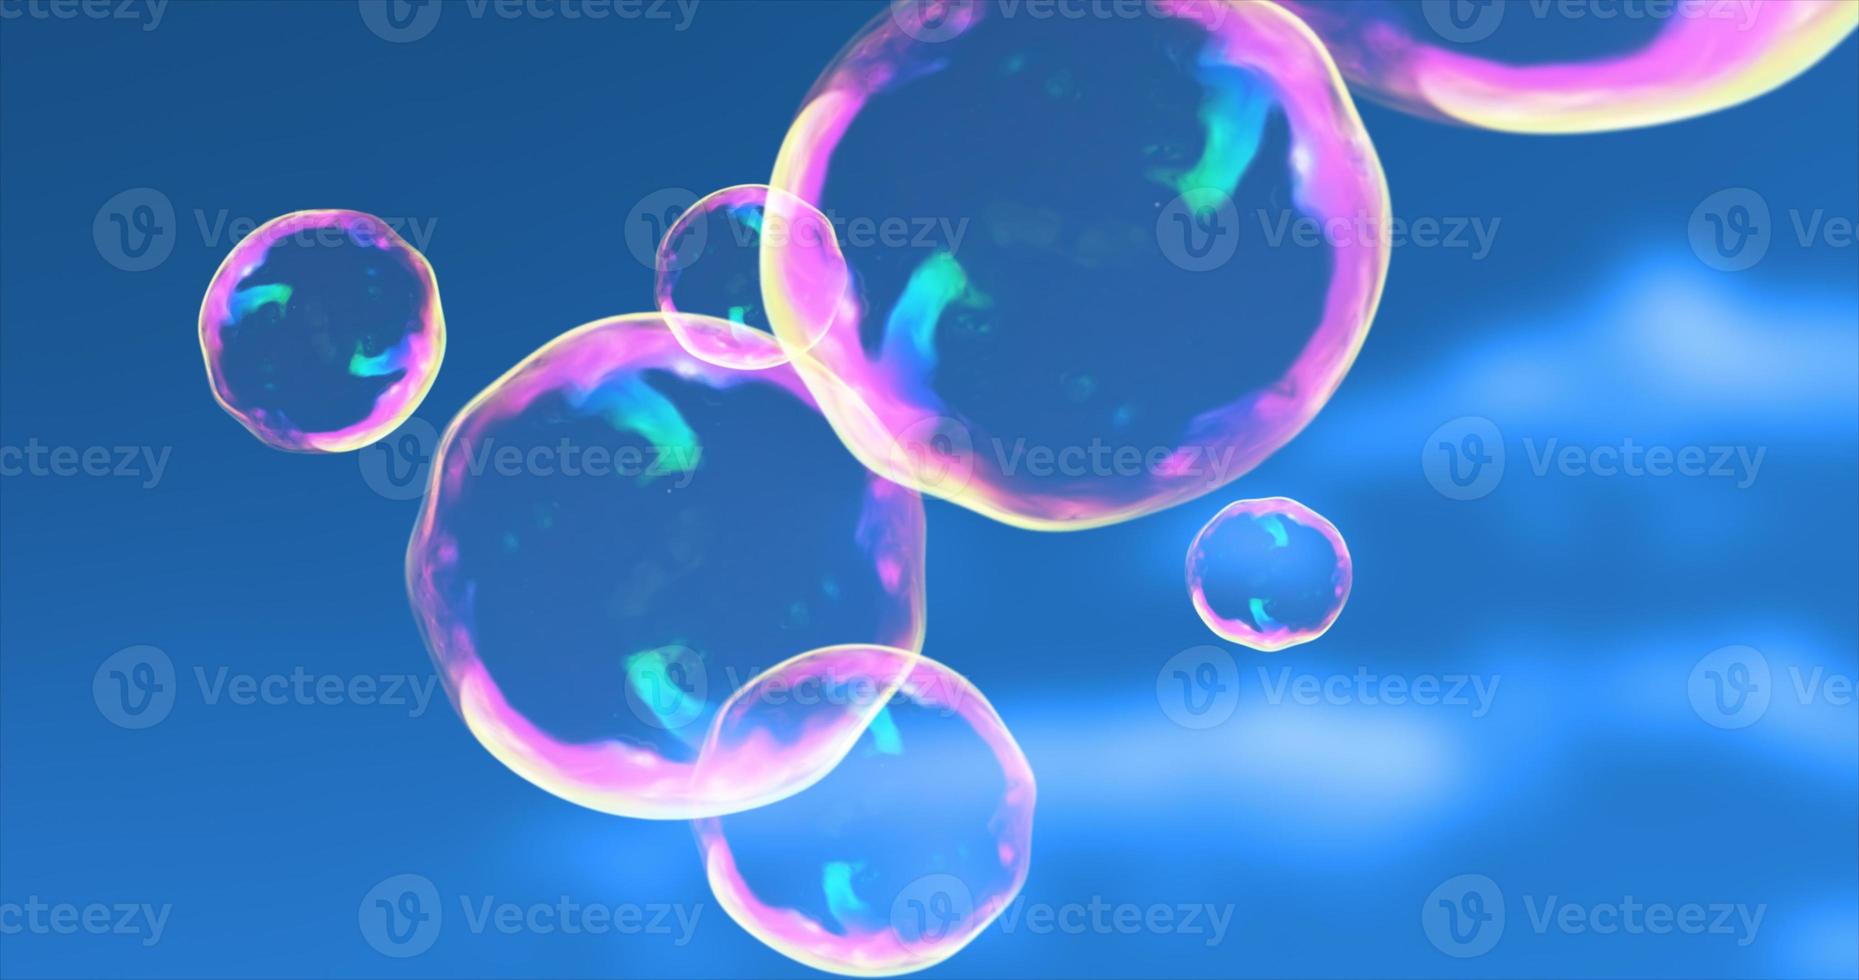 Abstract transparent soap bubbles flying up bright iridescent beautiful festive against the blue sky. Abstract background photo